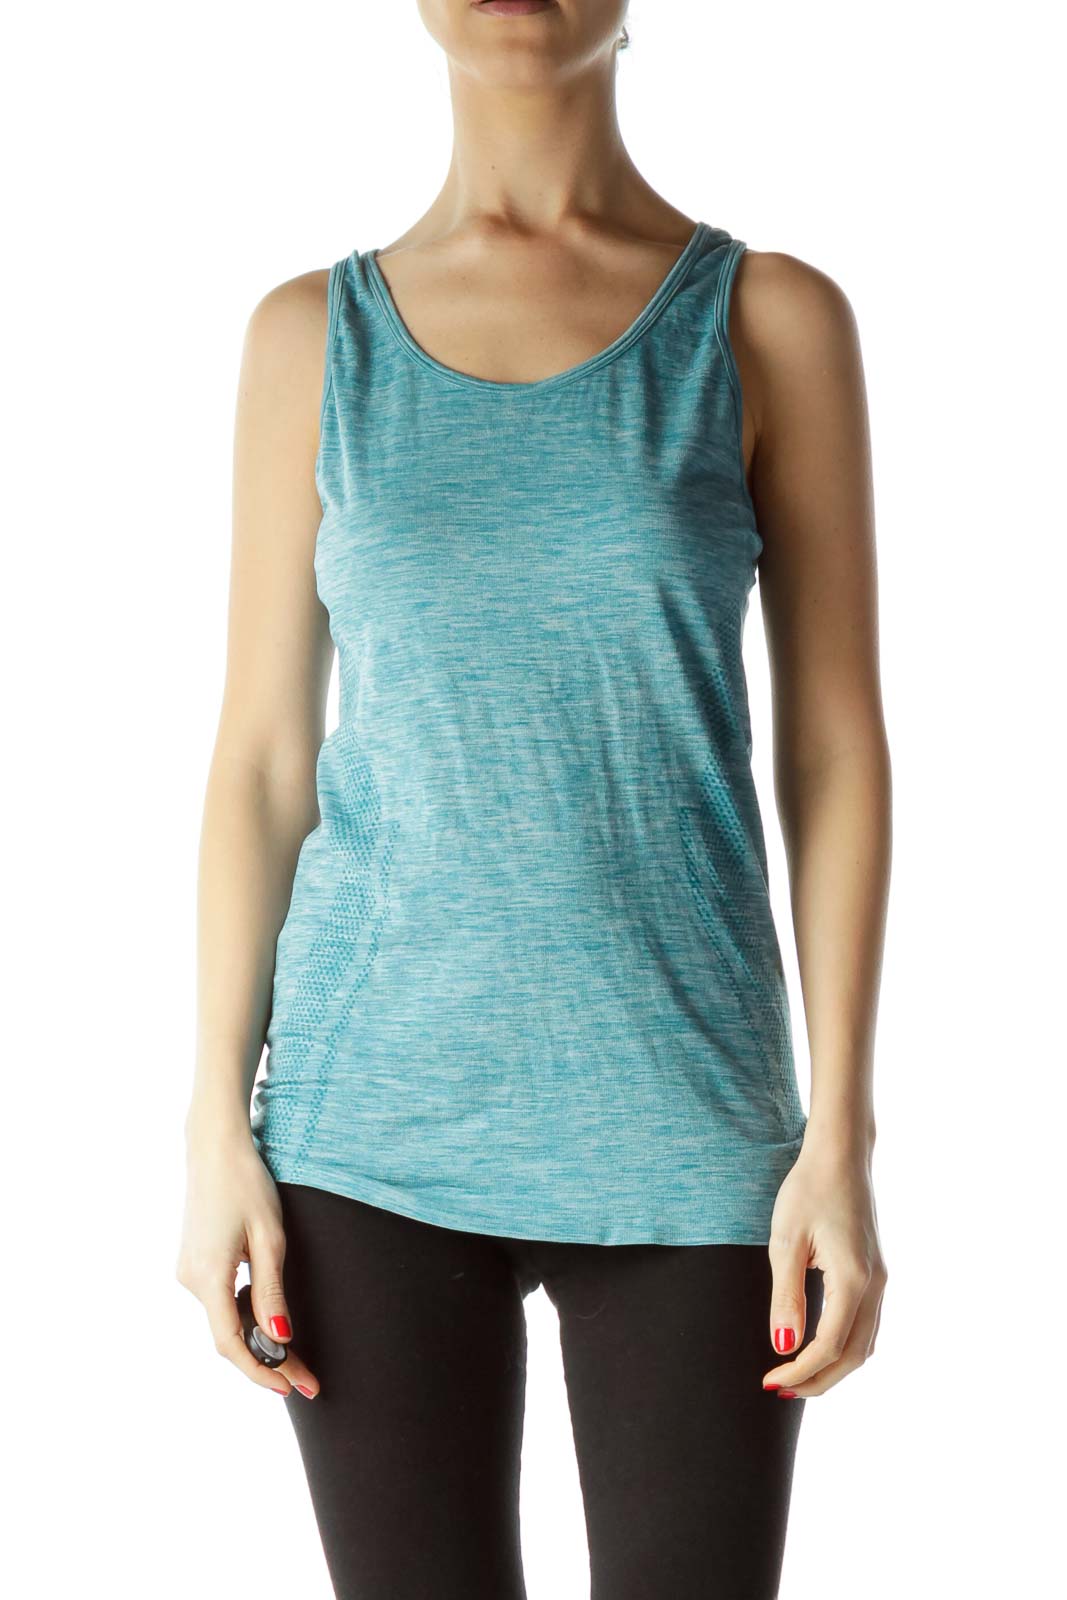 Blue Halter Sports Top Front